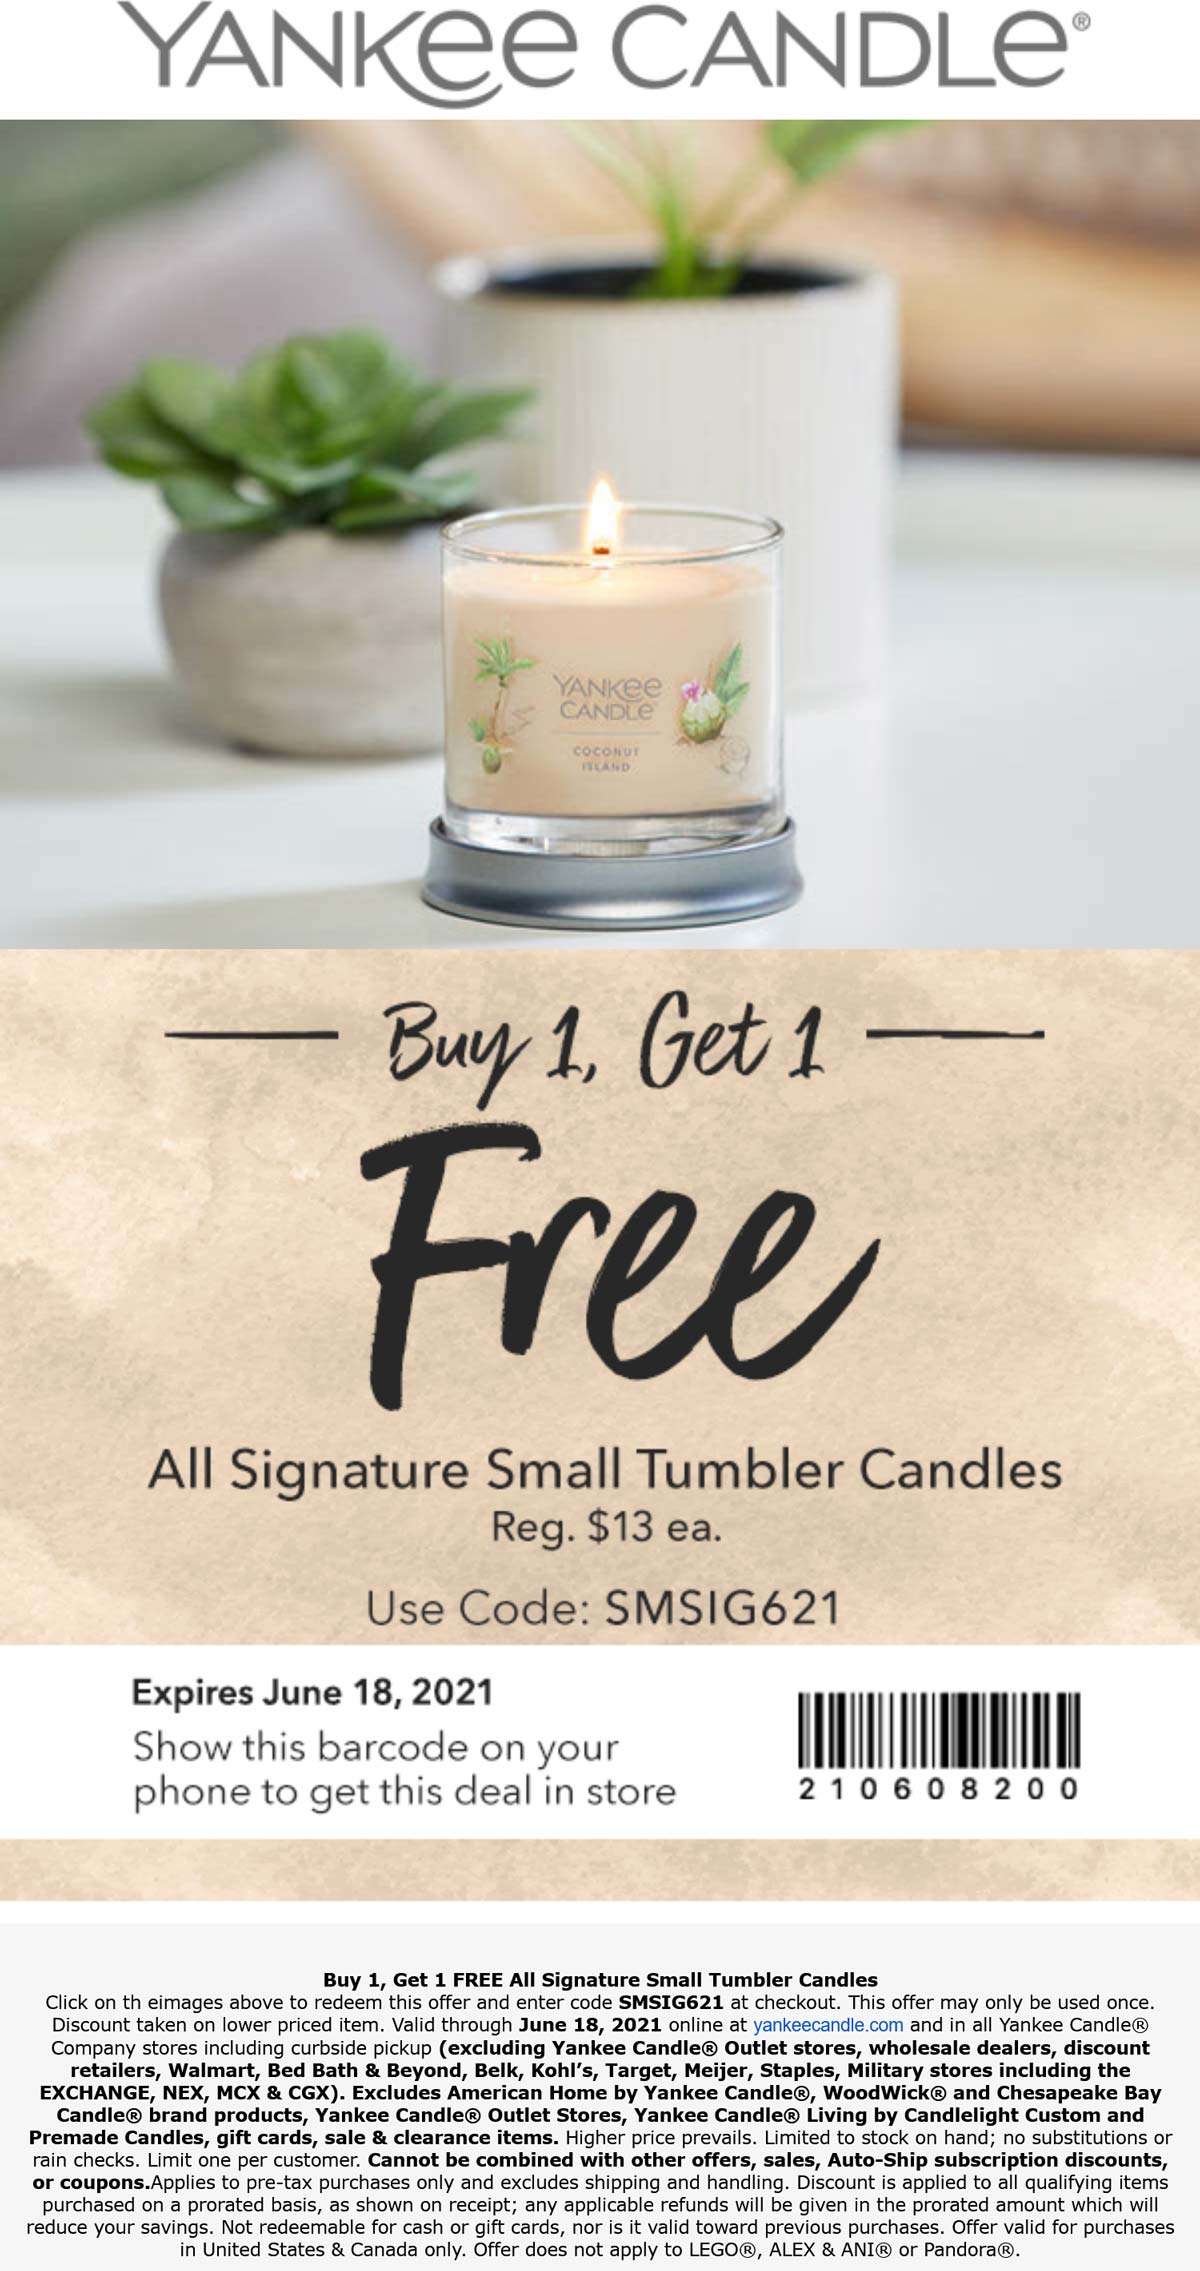 Yankee Candle stores Coupon  Second candle free at Yankee Candle, or online via promo code SMSIG621 #yankeecandle 